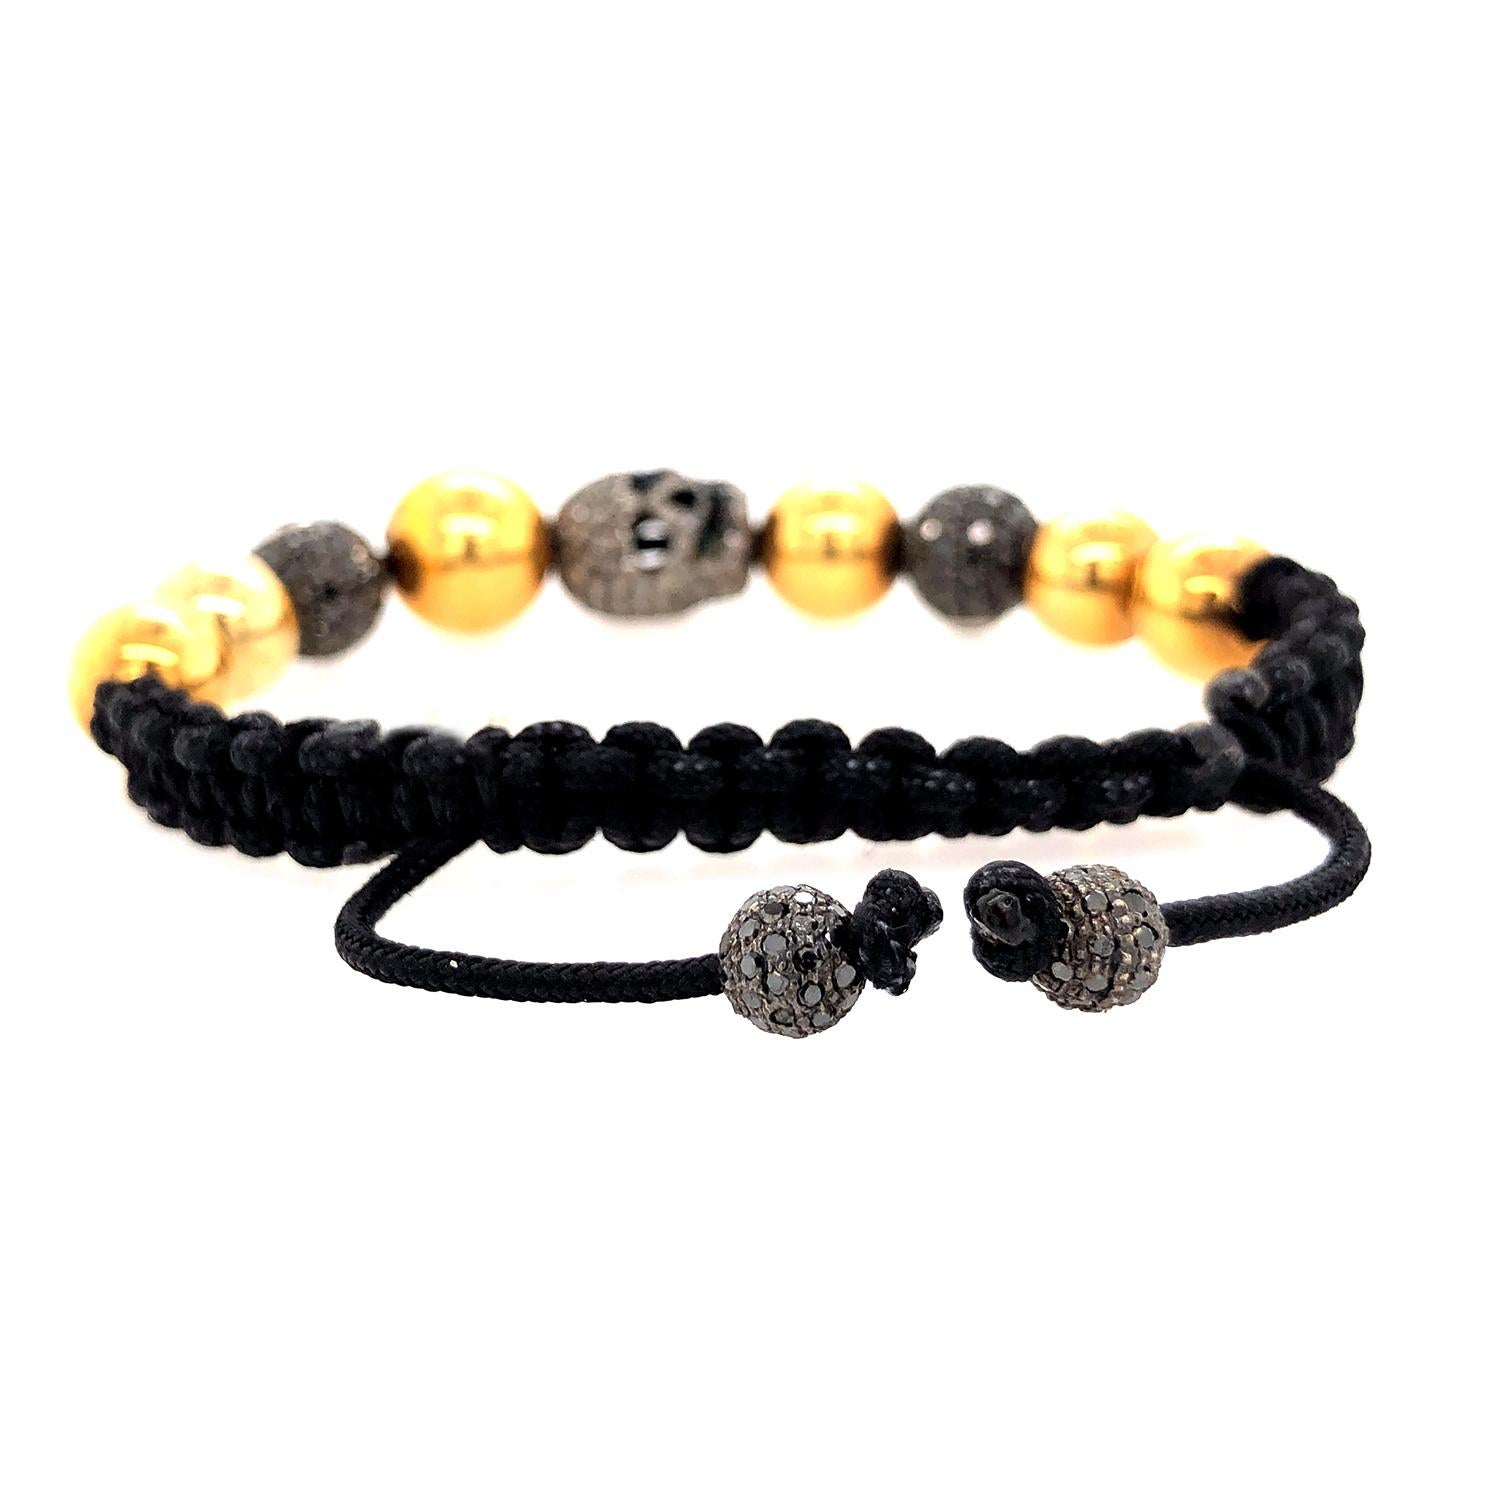 Mixed Cut Pave Diamond Beaded Skull Macrame Bracelet Made In 14k Gold & Silver For Sale